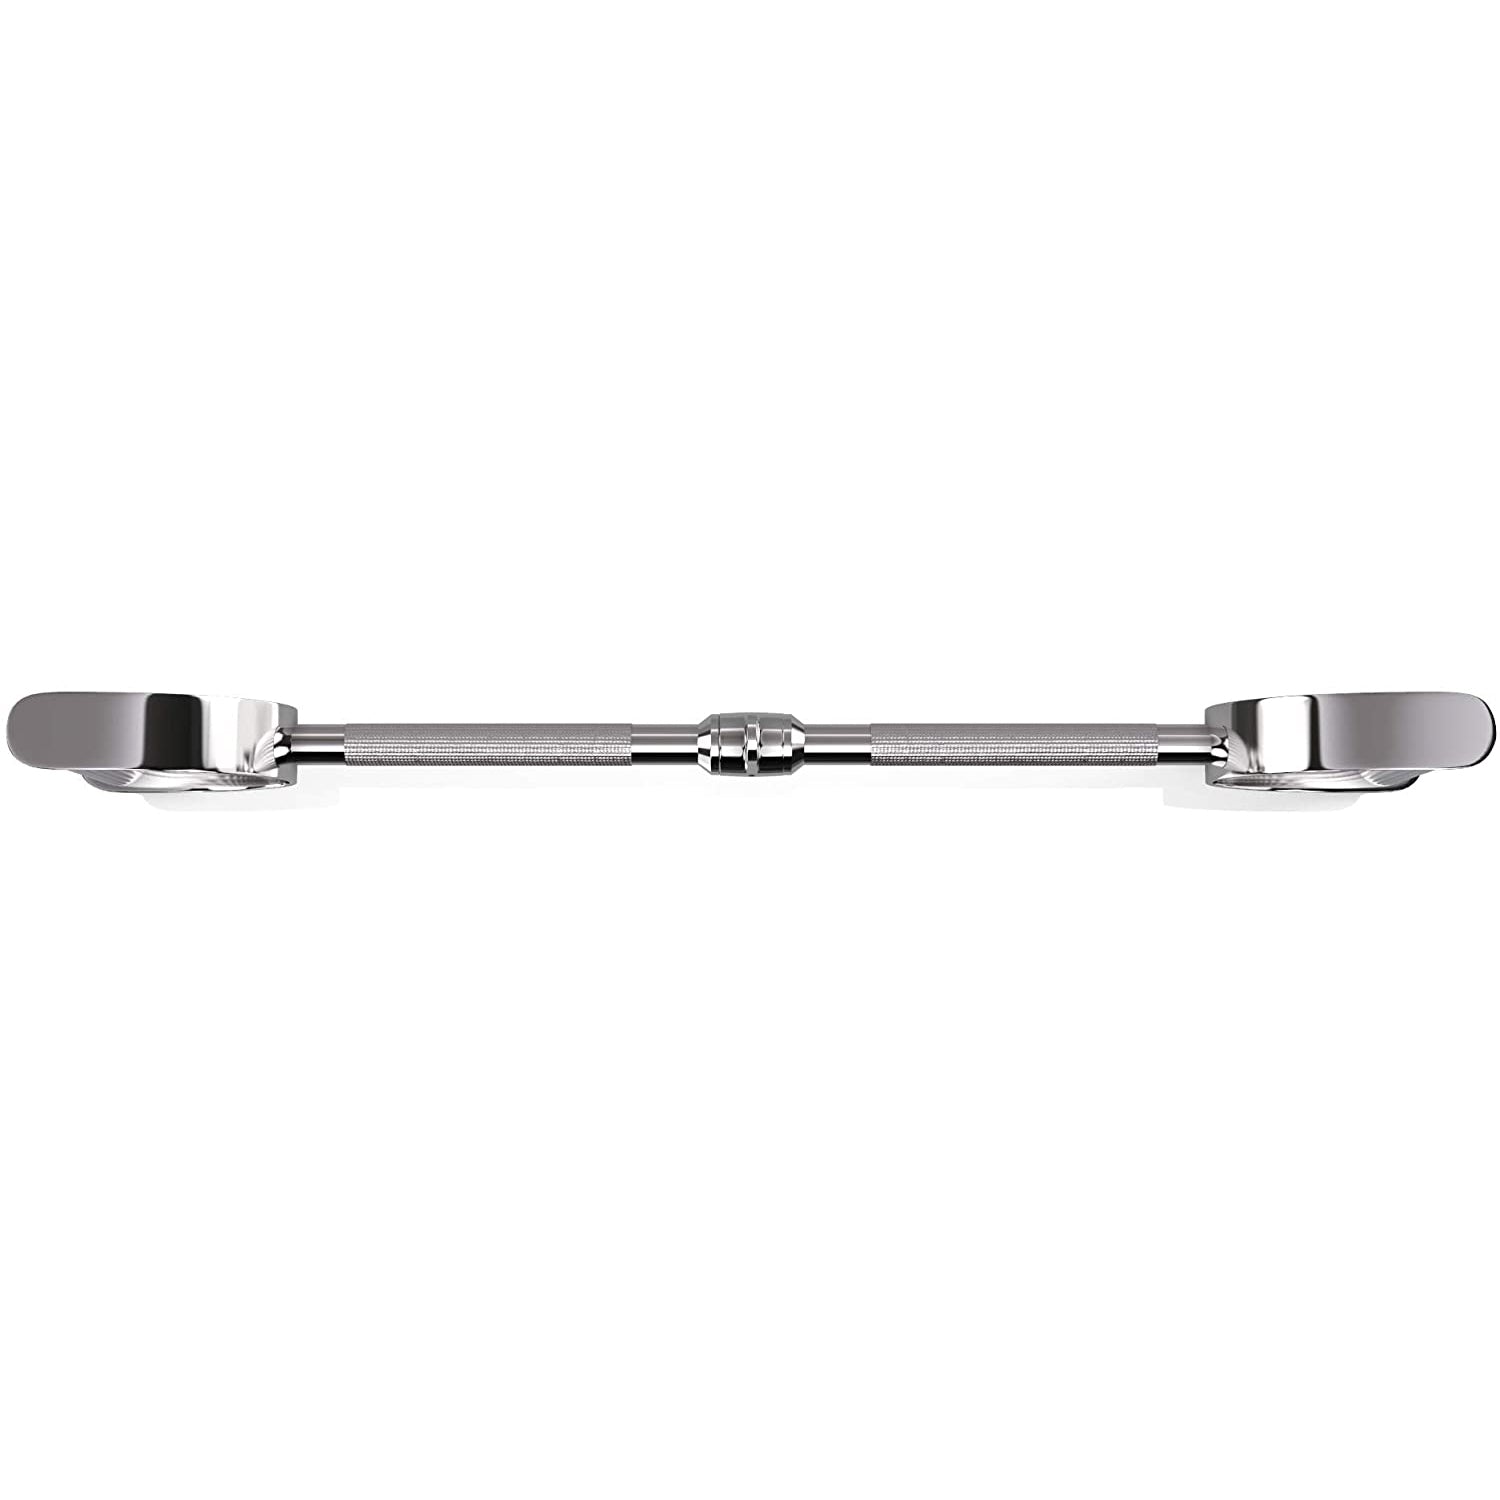 Chrome Lat Bar With Handles For Cable Machines - Cable 